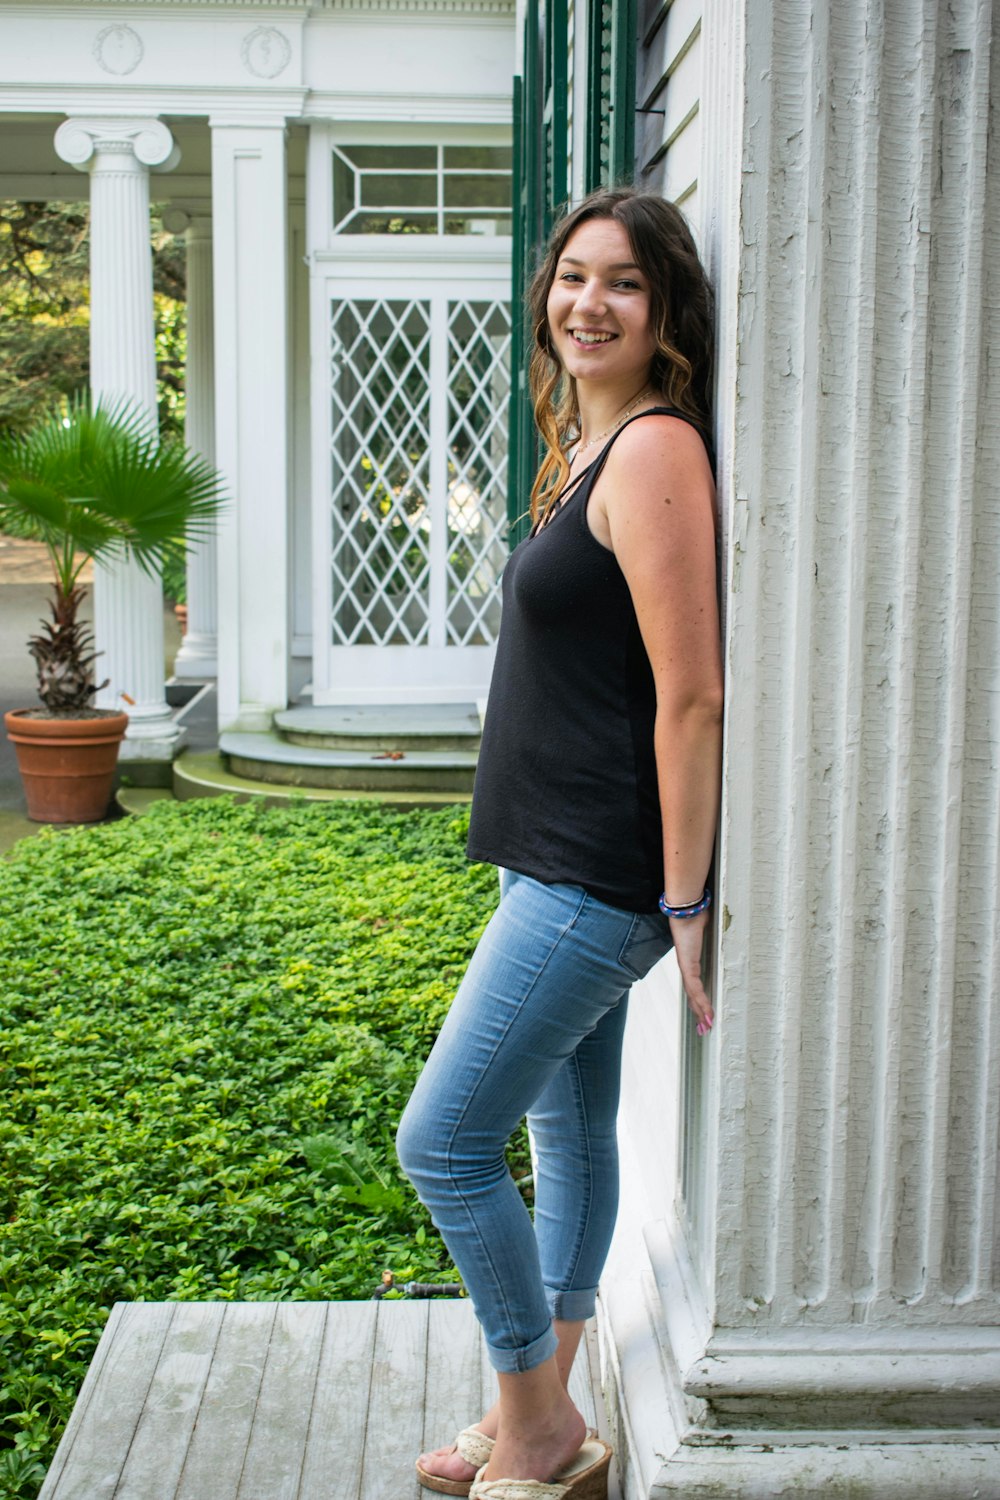 woman in black tank top and blue denim jeans standing on green grass field during daytime